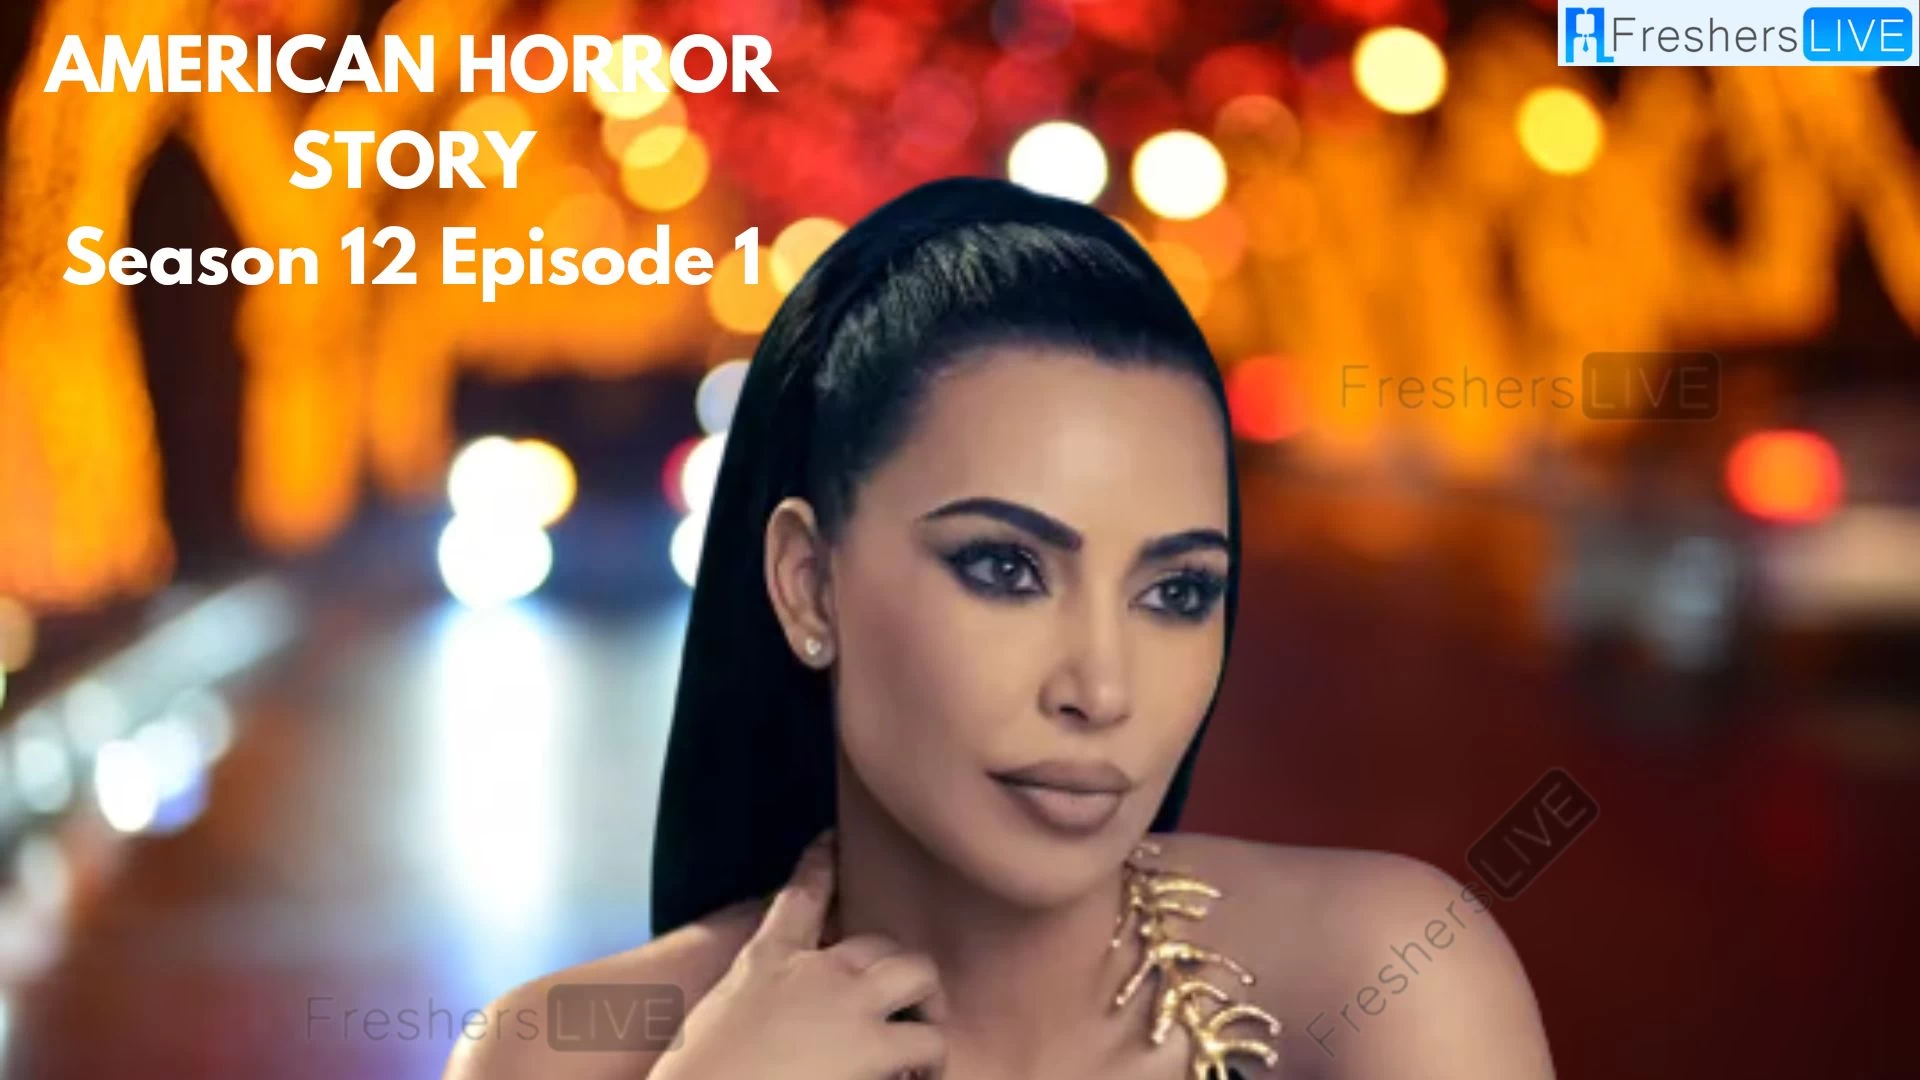 American Horror Story Season 12 Episode 1 Ending Explained, Release Date, Cast, Plot, Where to Watch and More